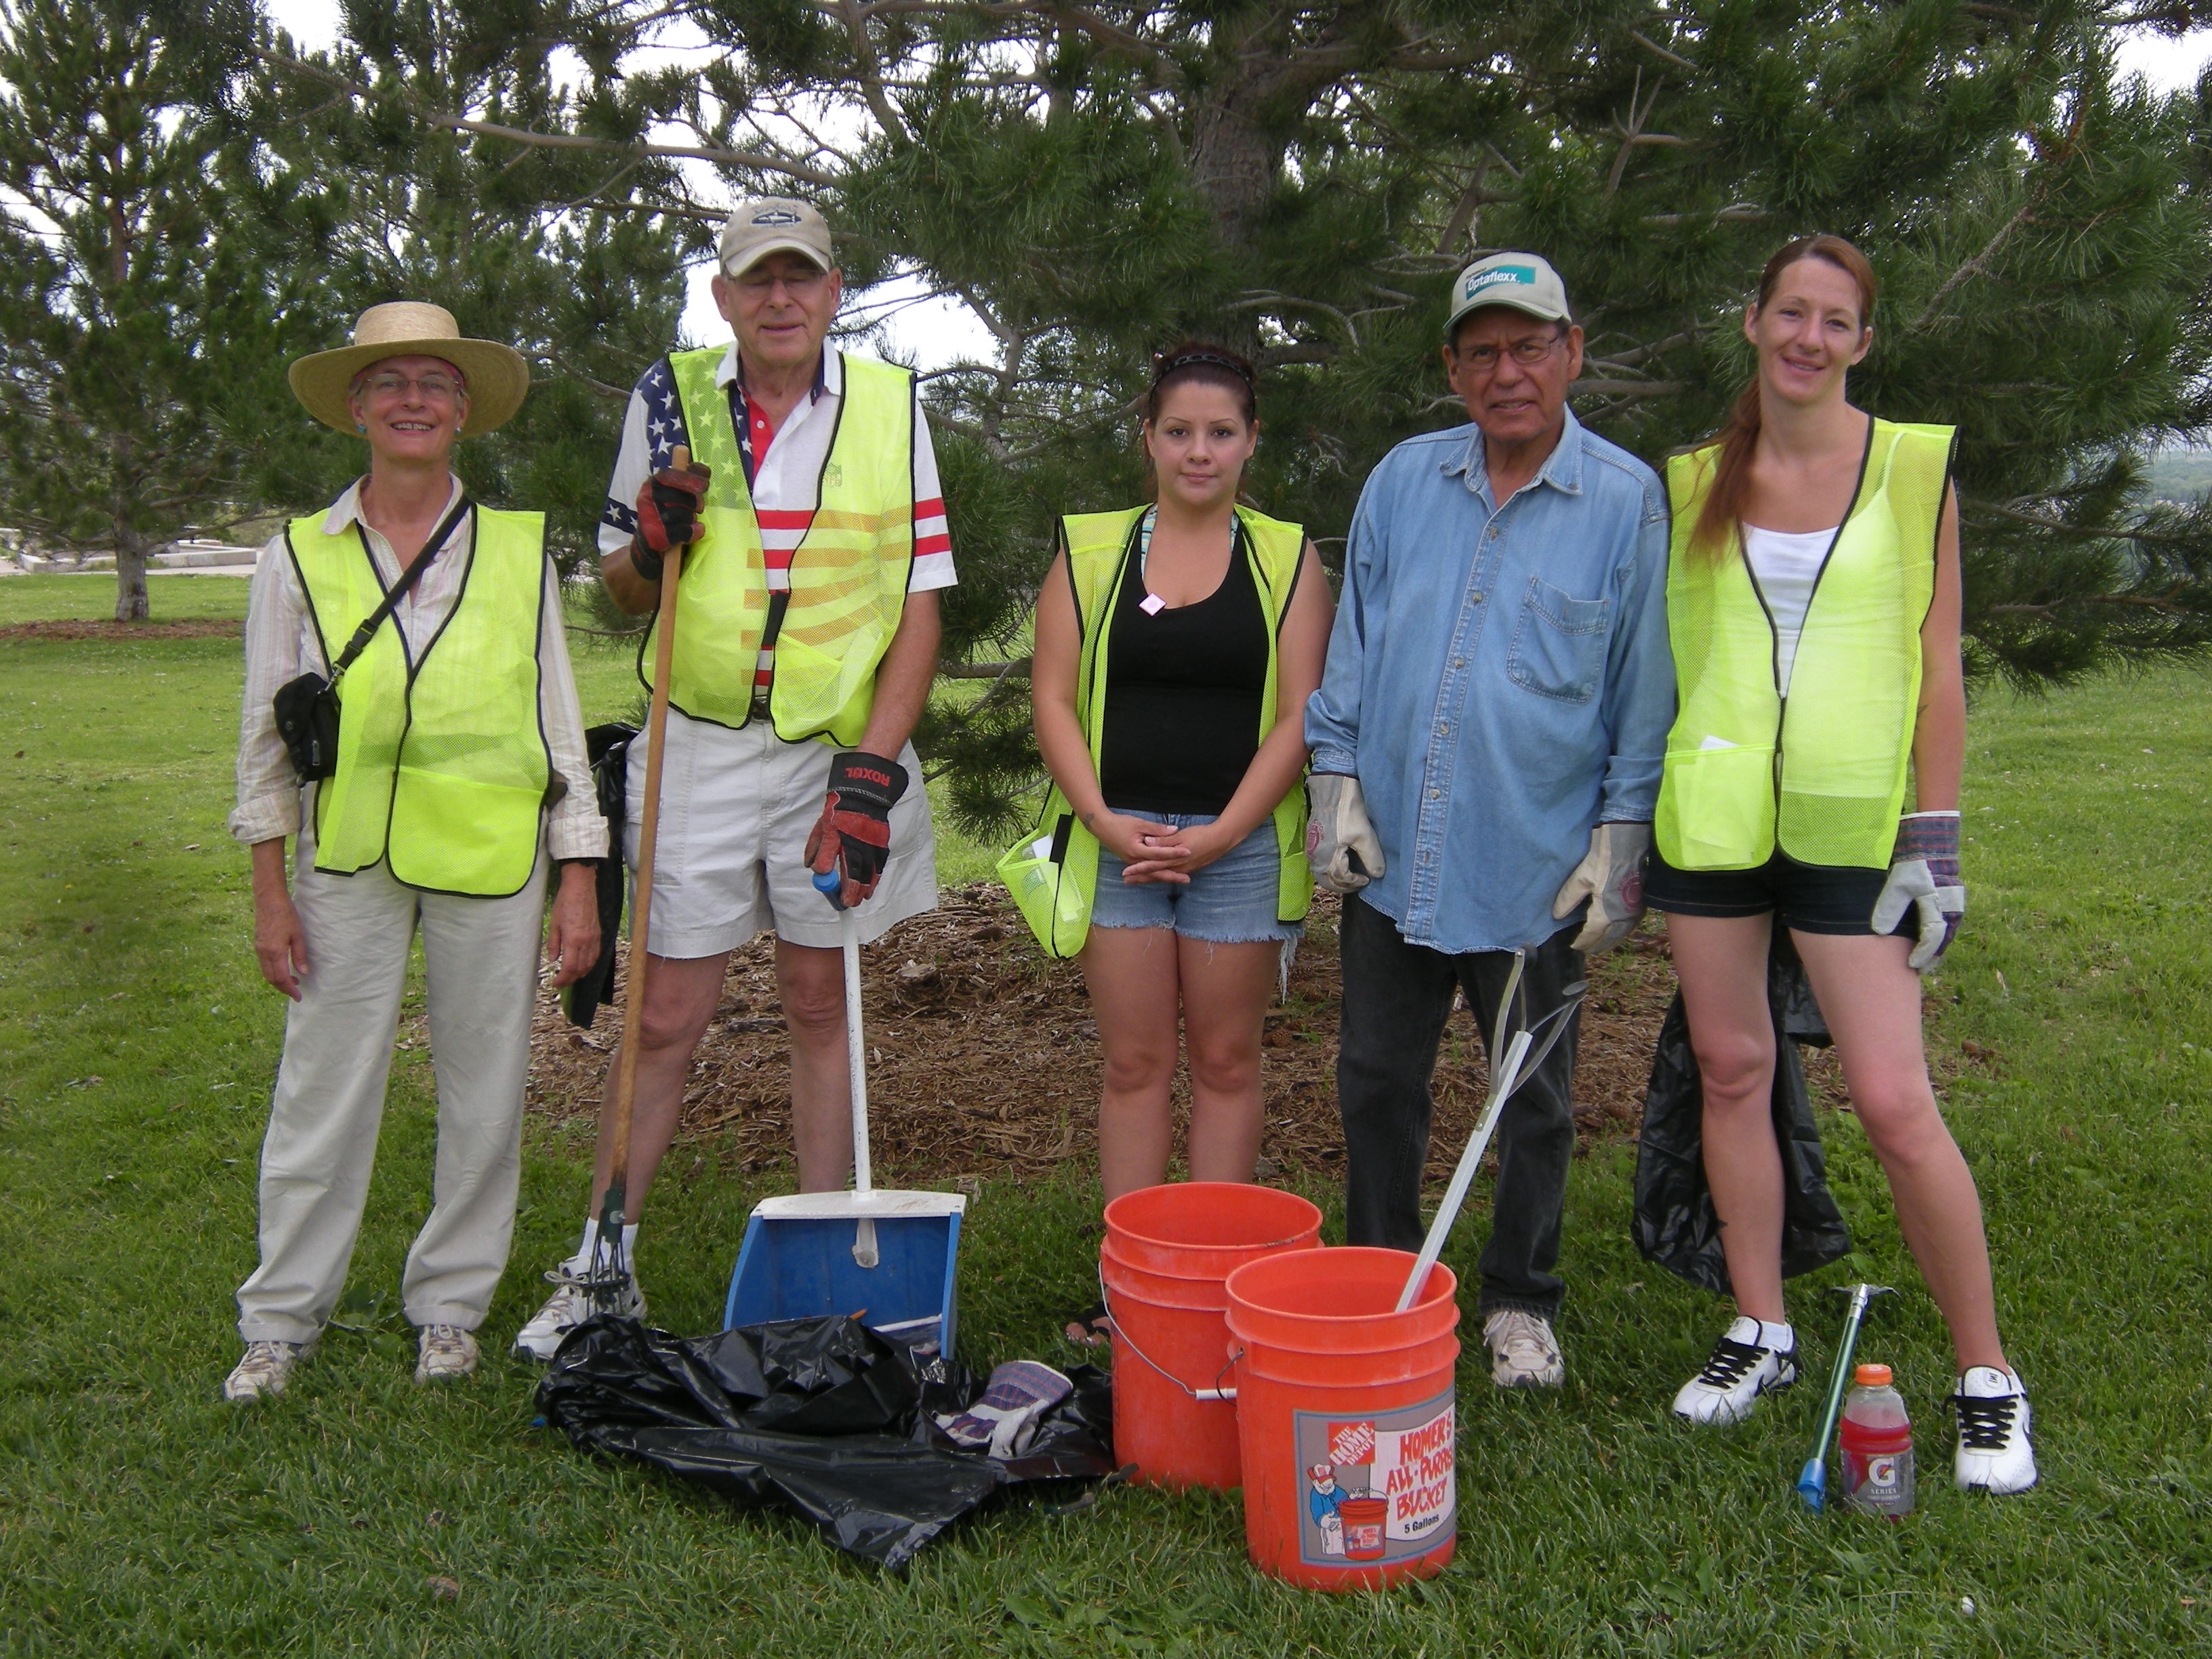 Pat Hurley and Lavaland Park Volunteers